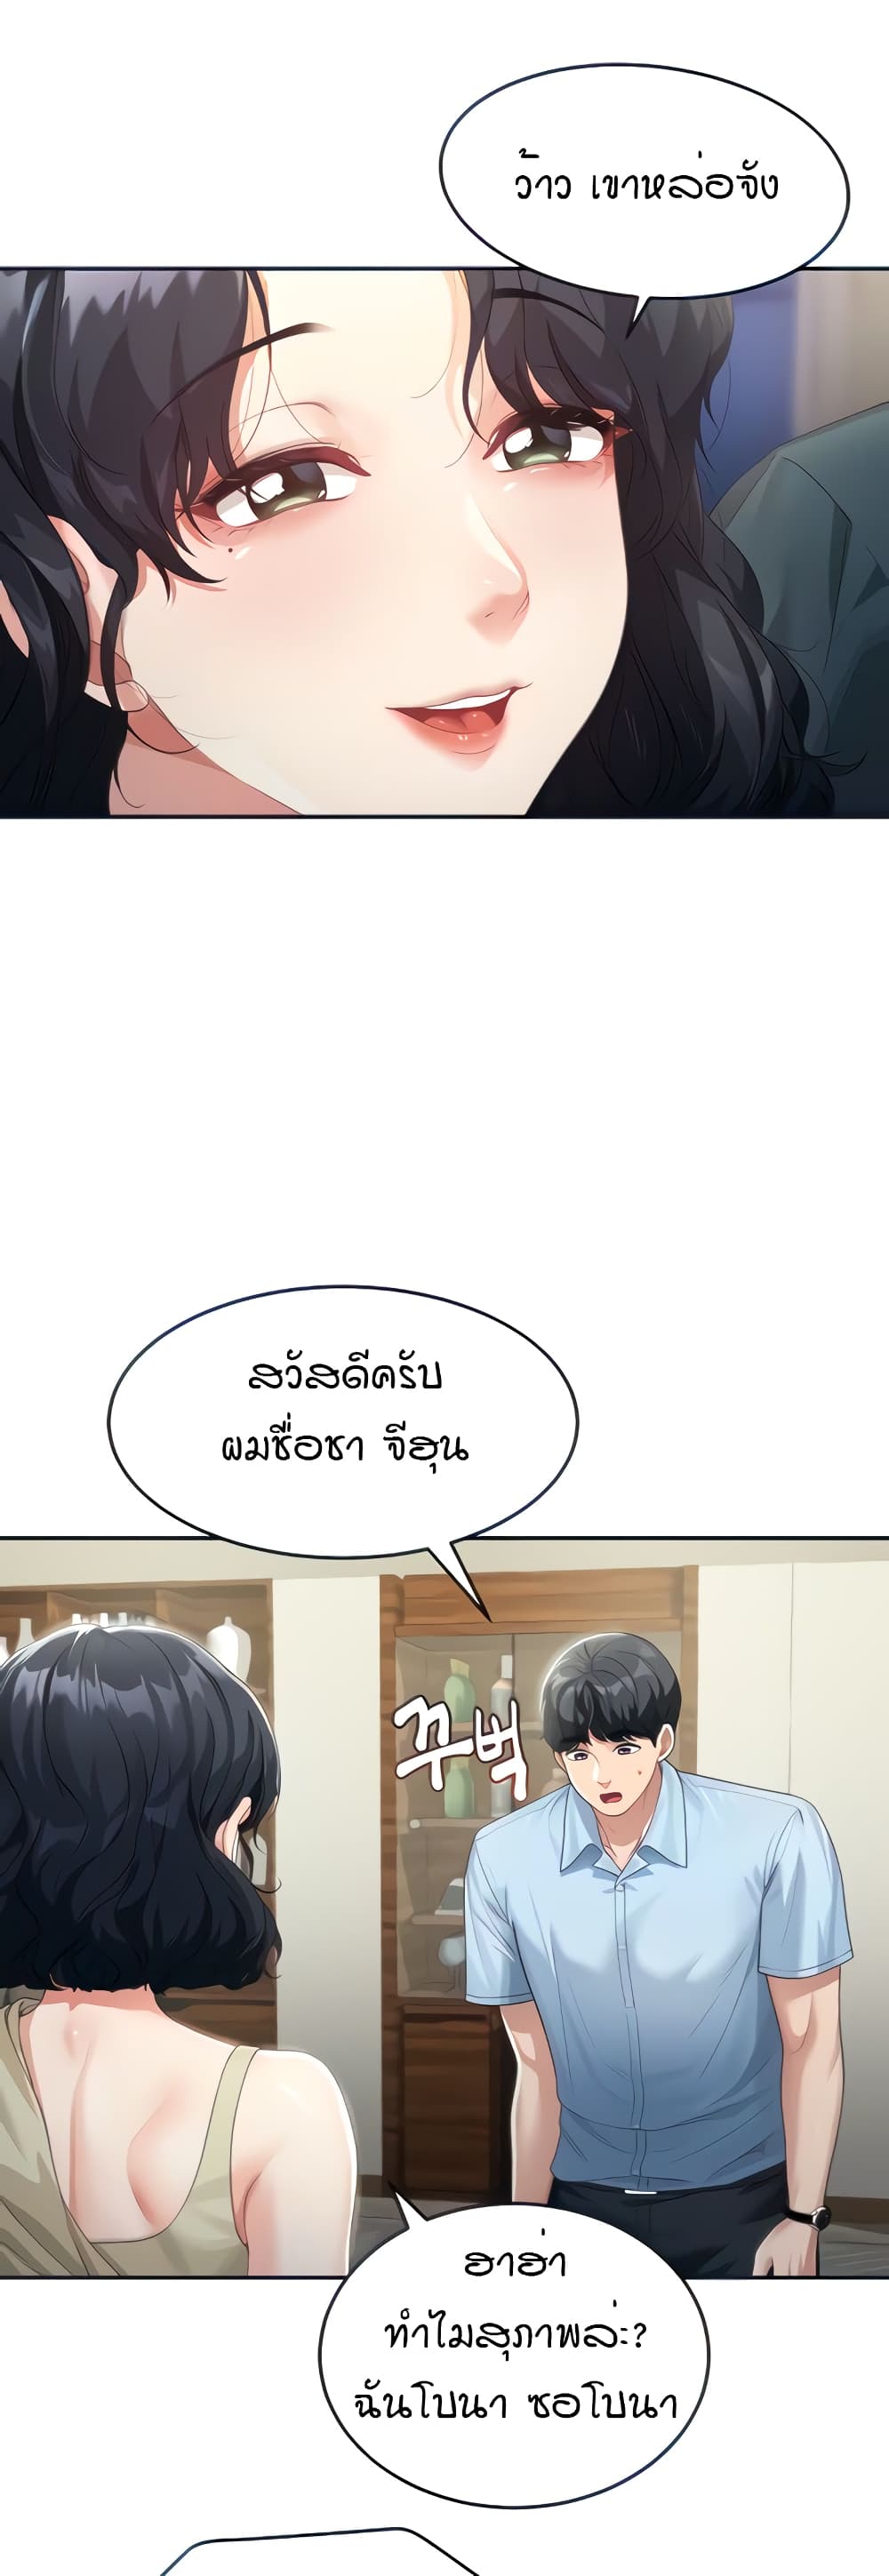 Is It Your Mother or Sister? ตอนที่ 2 ภาพ 27